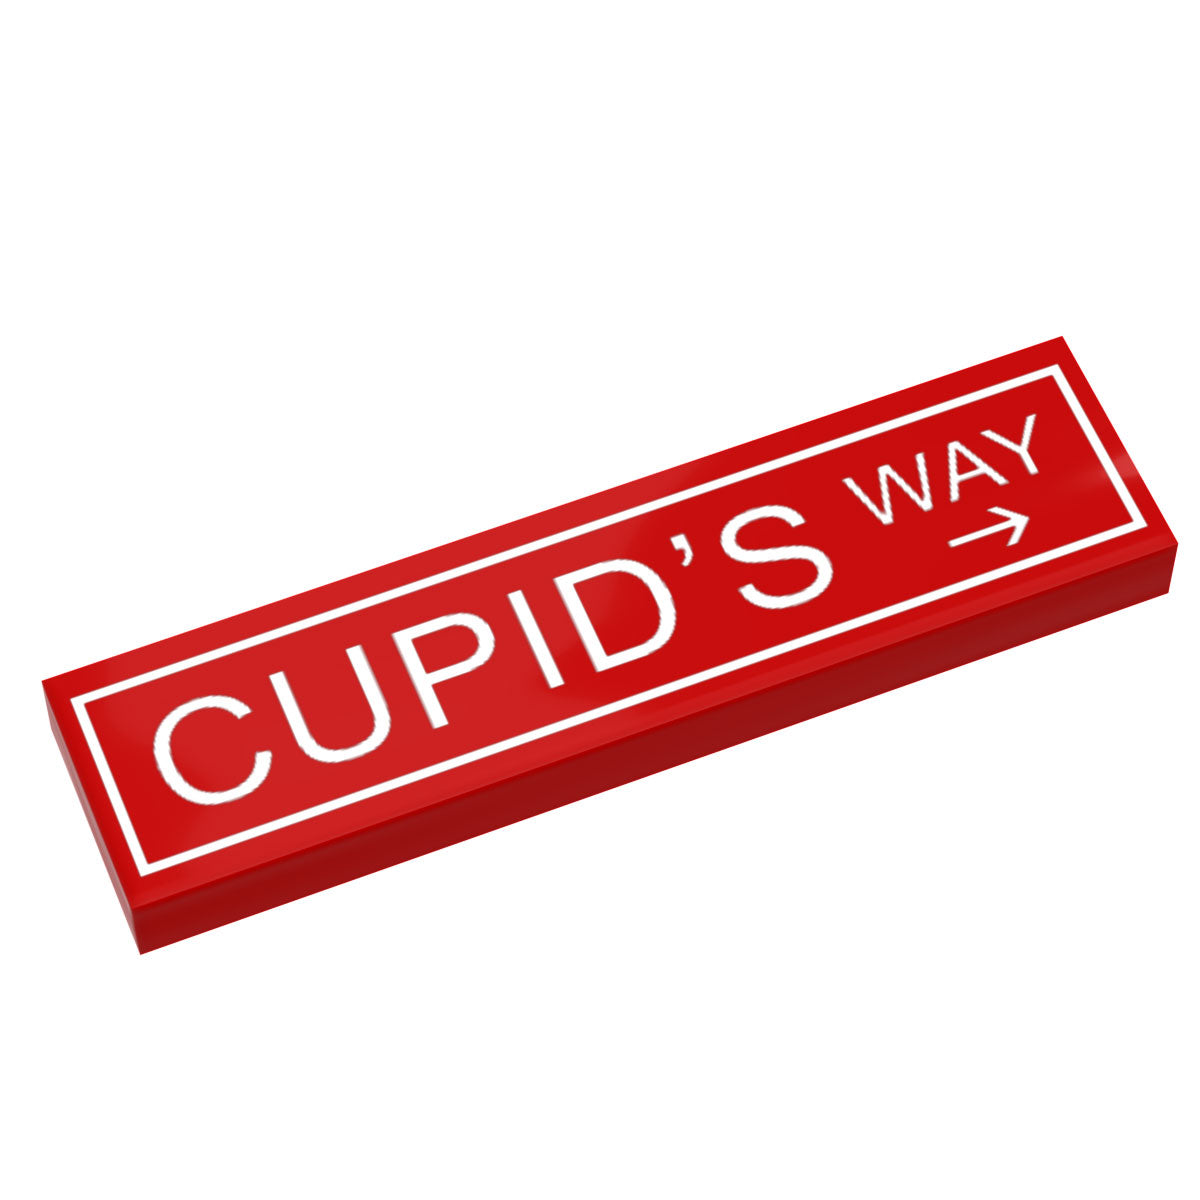 Cupid's Way Street Sign made with LEGO part (1x4 Tile) - B3 Customs